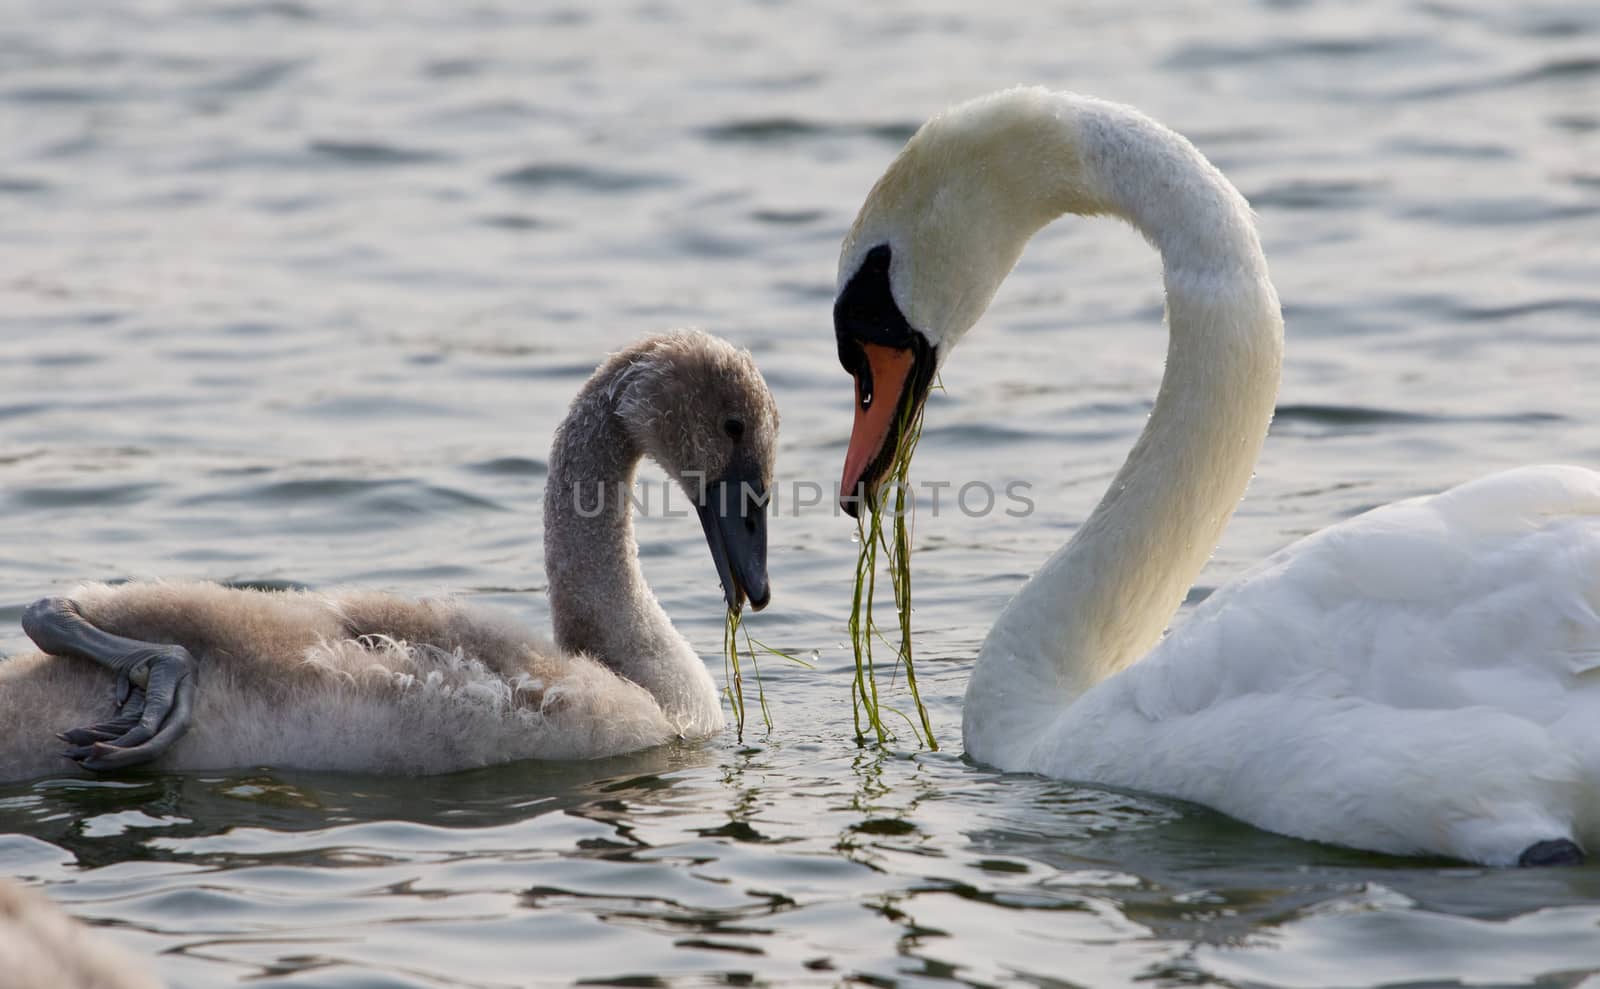 The young swan and his mother are eating together in the lake